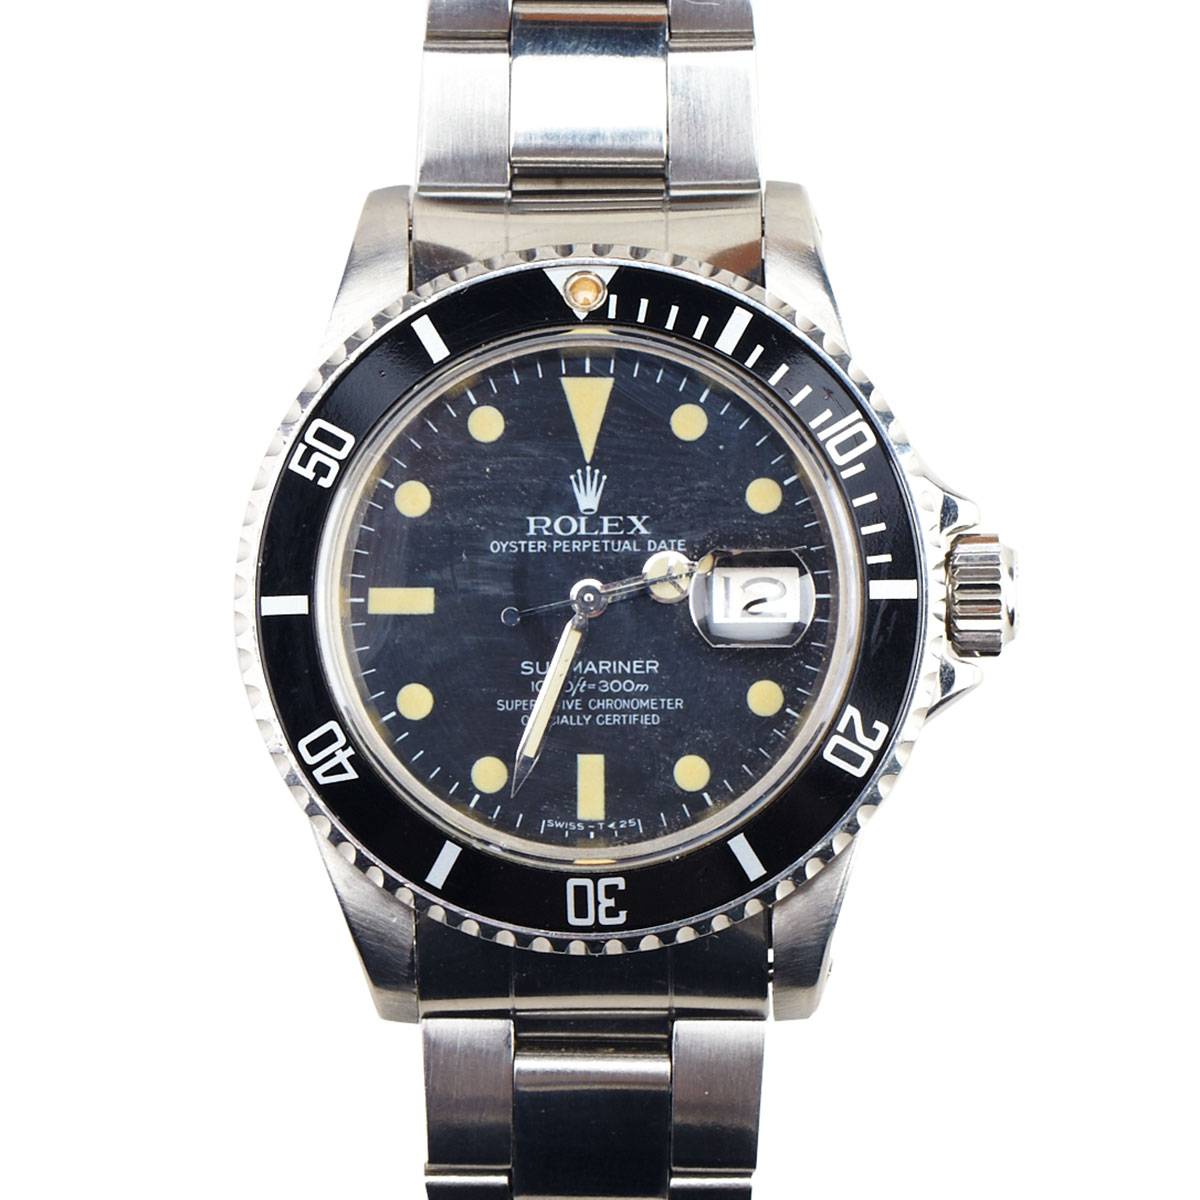 Rolex Oyster Perpetual Date Submariner 177b51